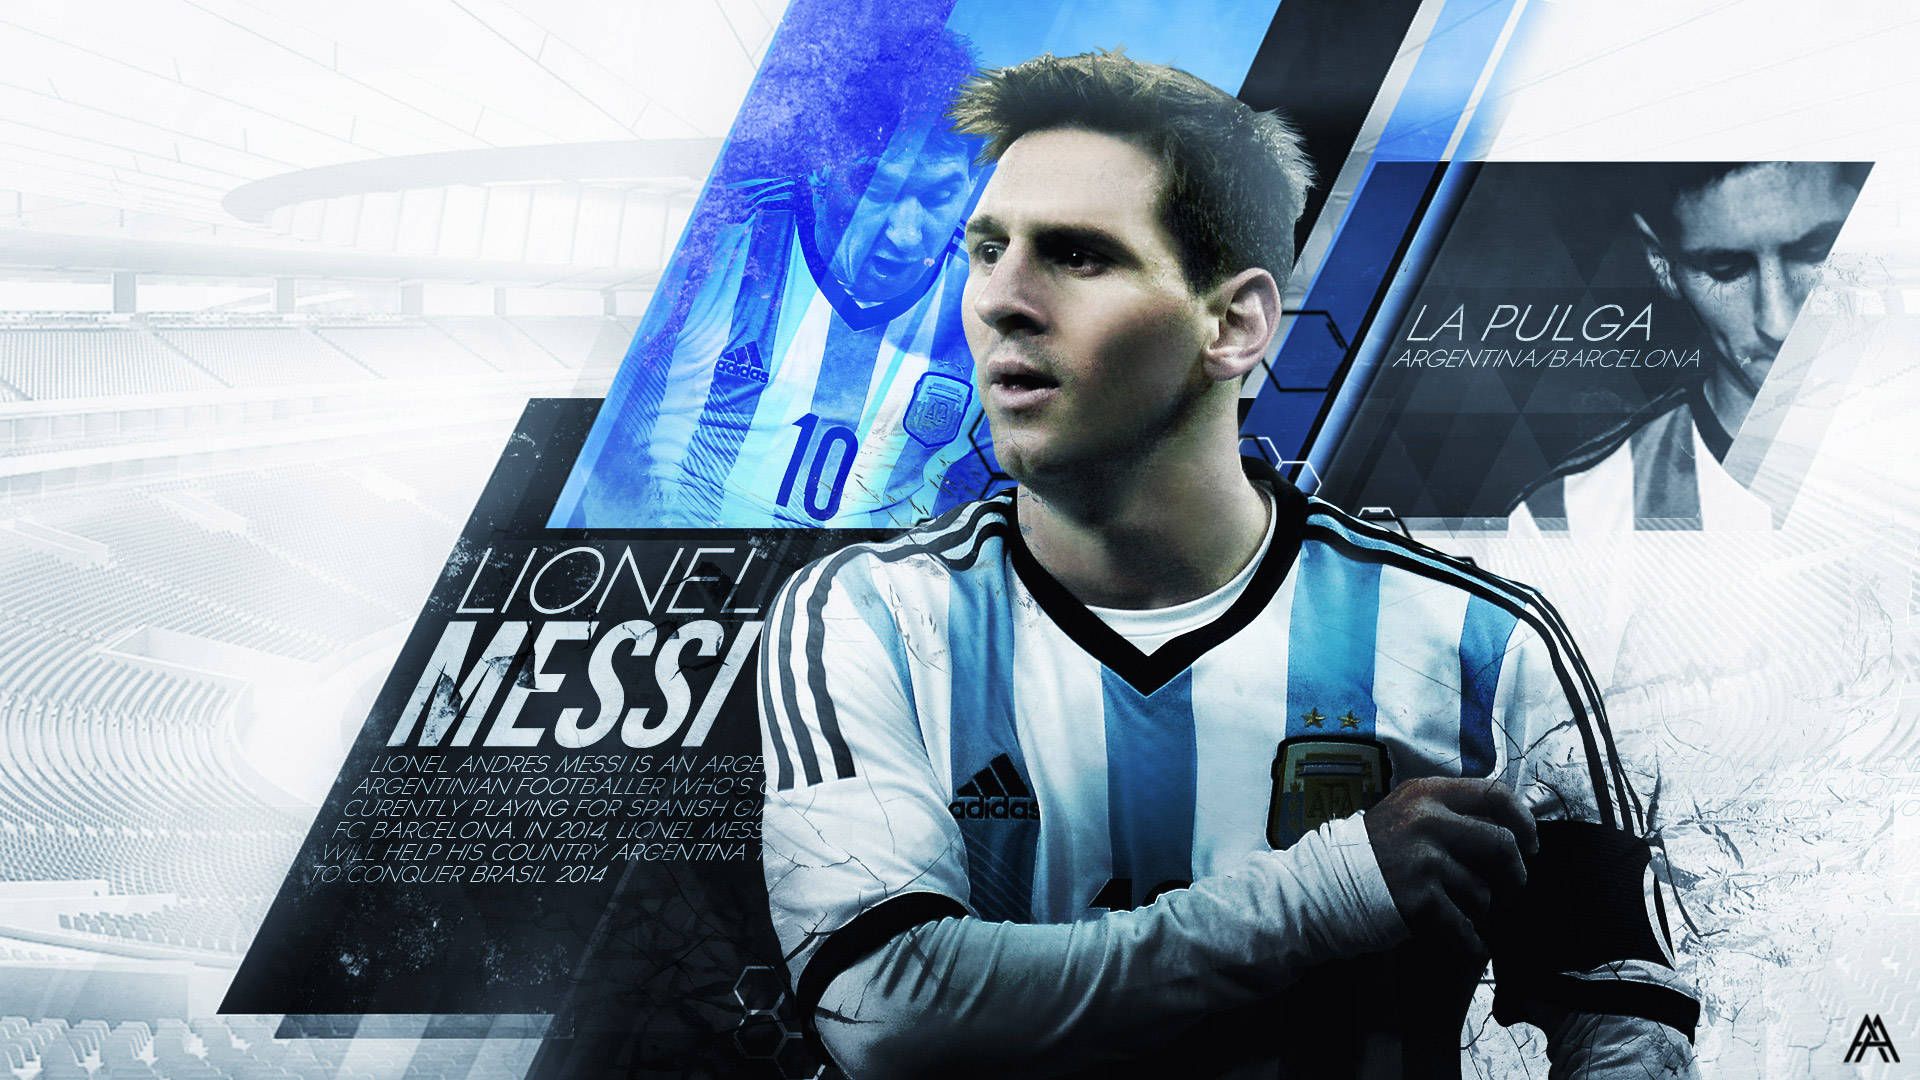 Lionel Messi Wallpaper For Android Festival Wallpaper